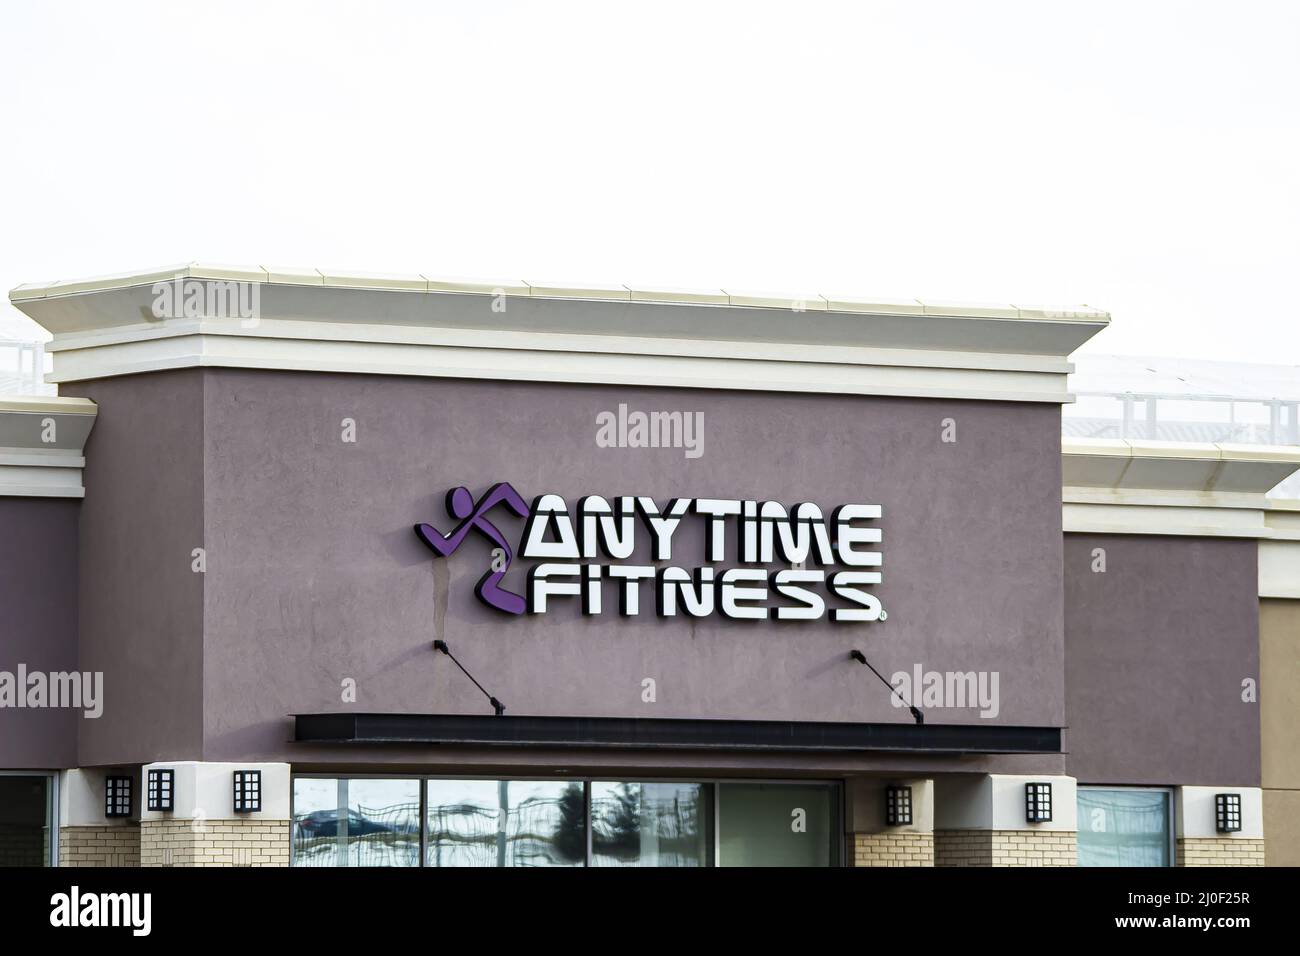 Calgary, Alberta. Canada Jan 4 2020. Anytime Fitness is a 24-hour health and fitness club headquartered in Woodbury, Minnesota. Stock Photo